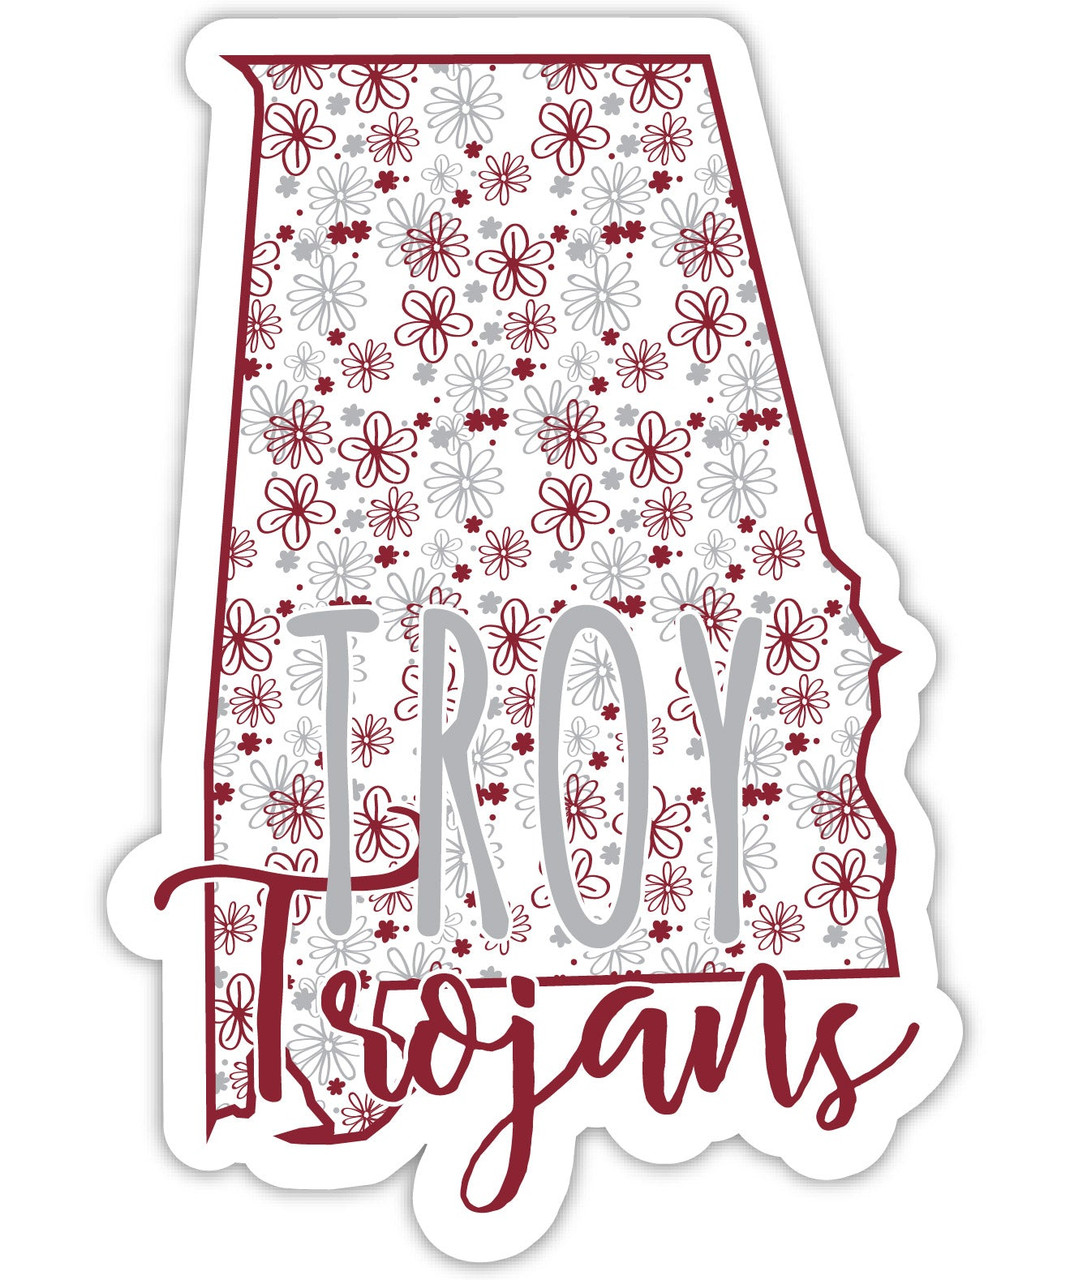 Troy University Floral State Die Cut Decal 2-Inch